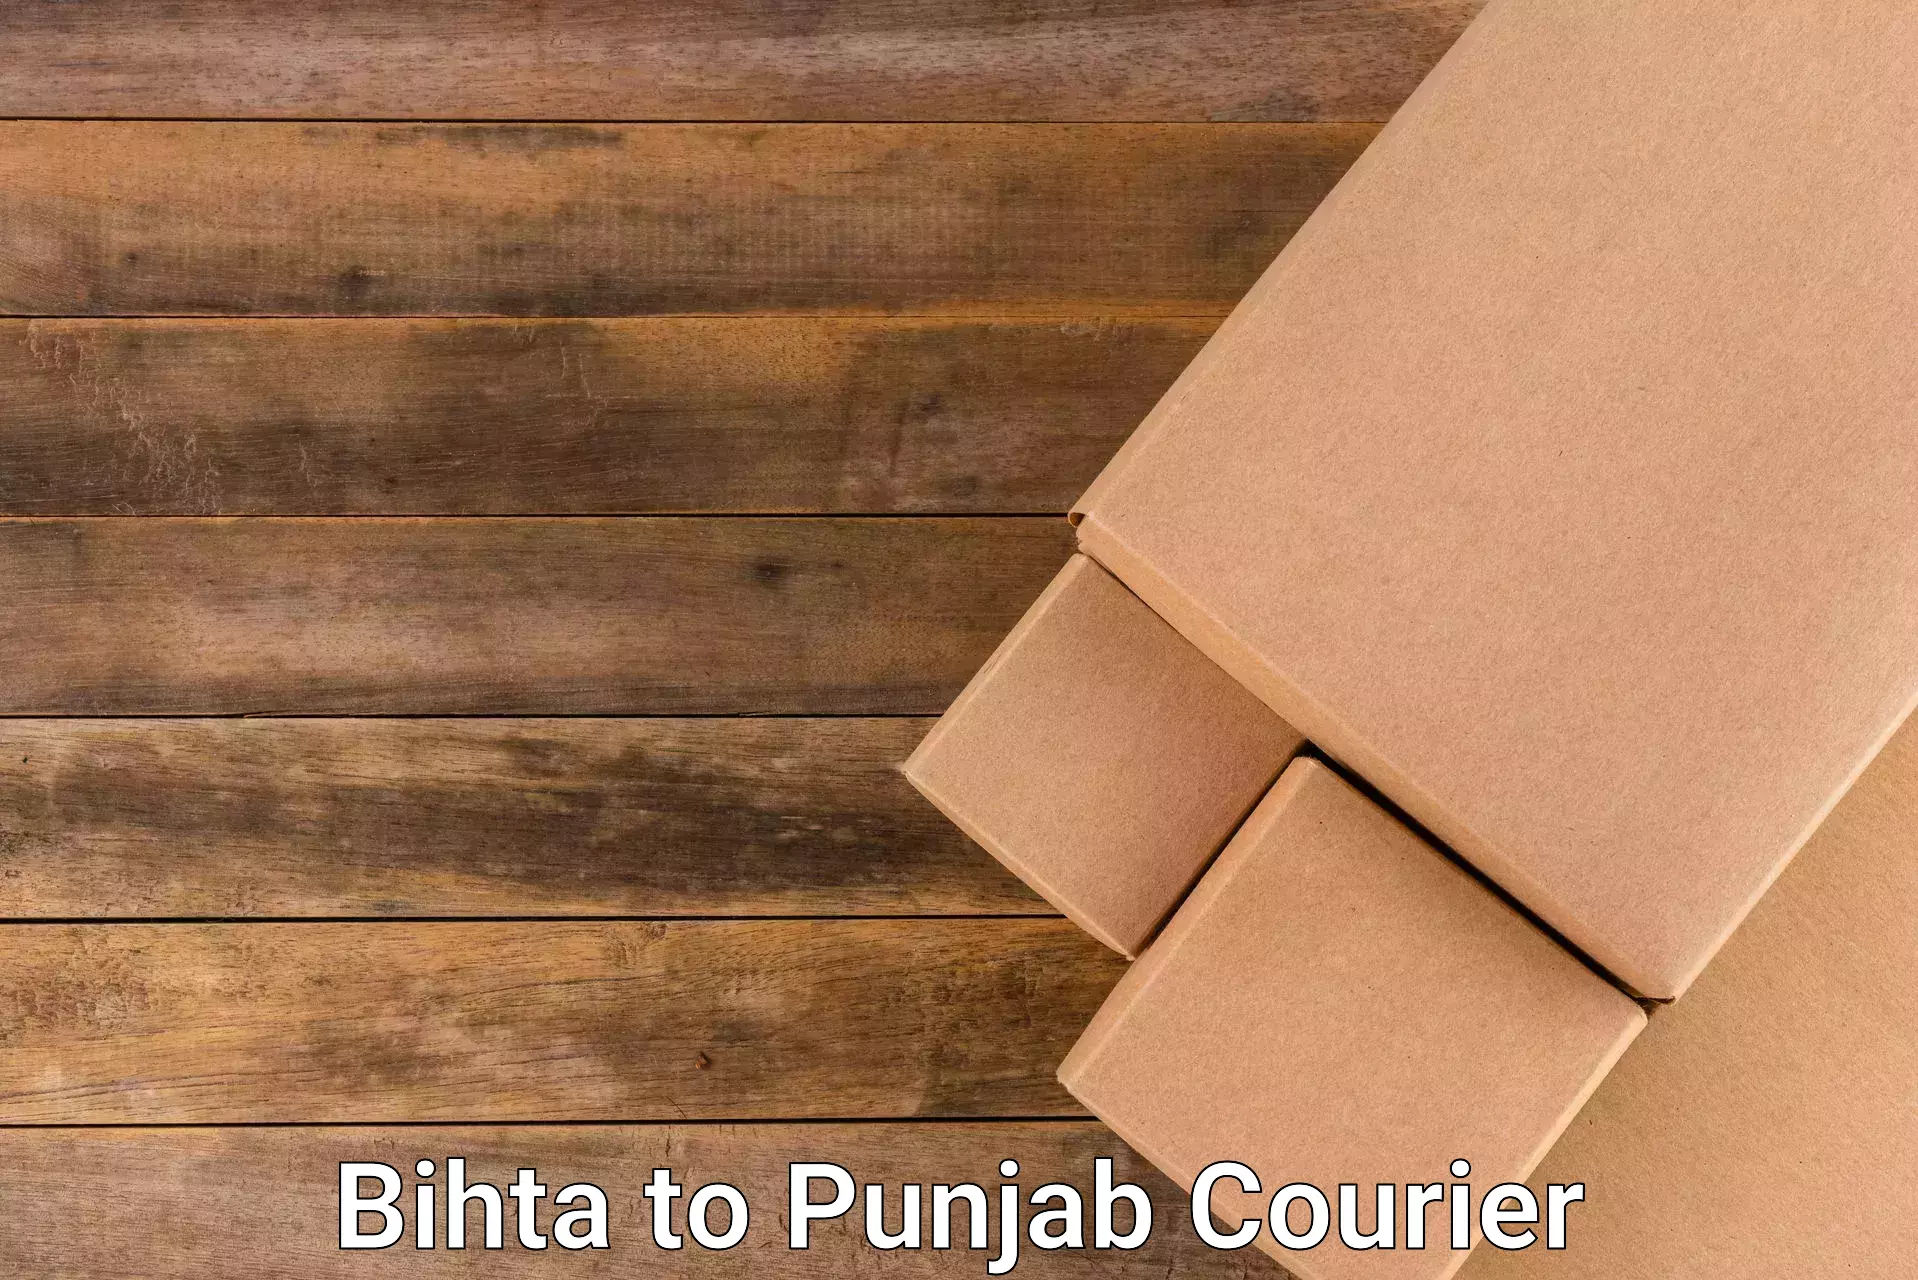 Specialized courier services Bihta to Punjab